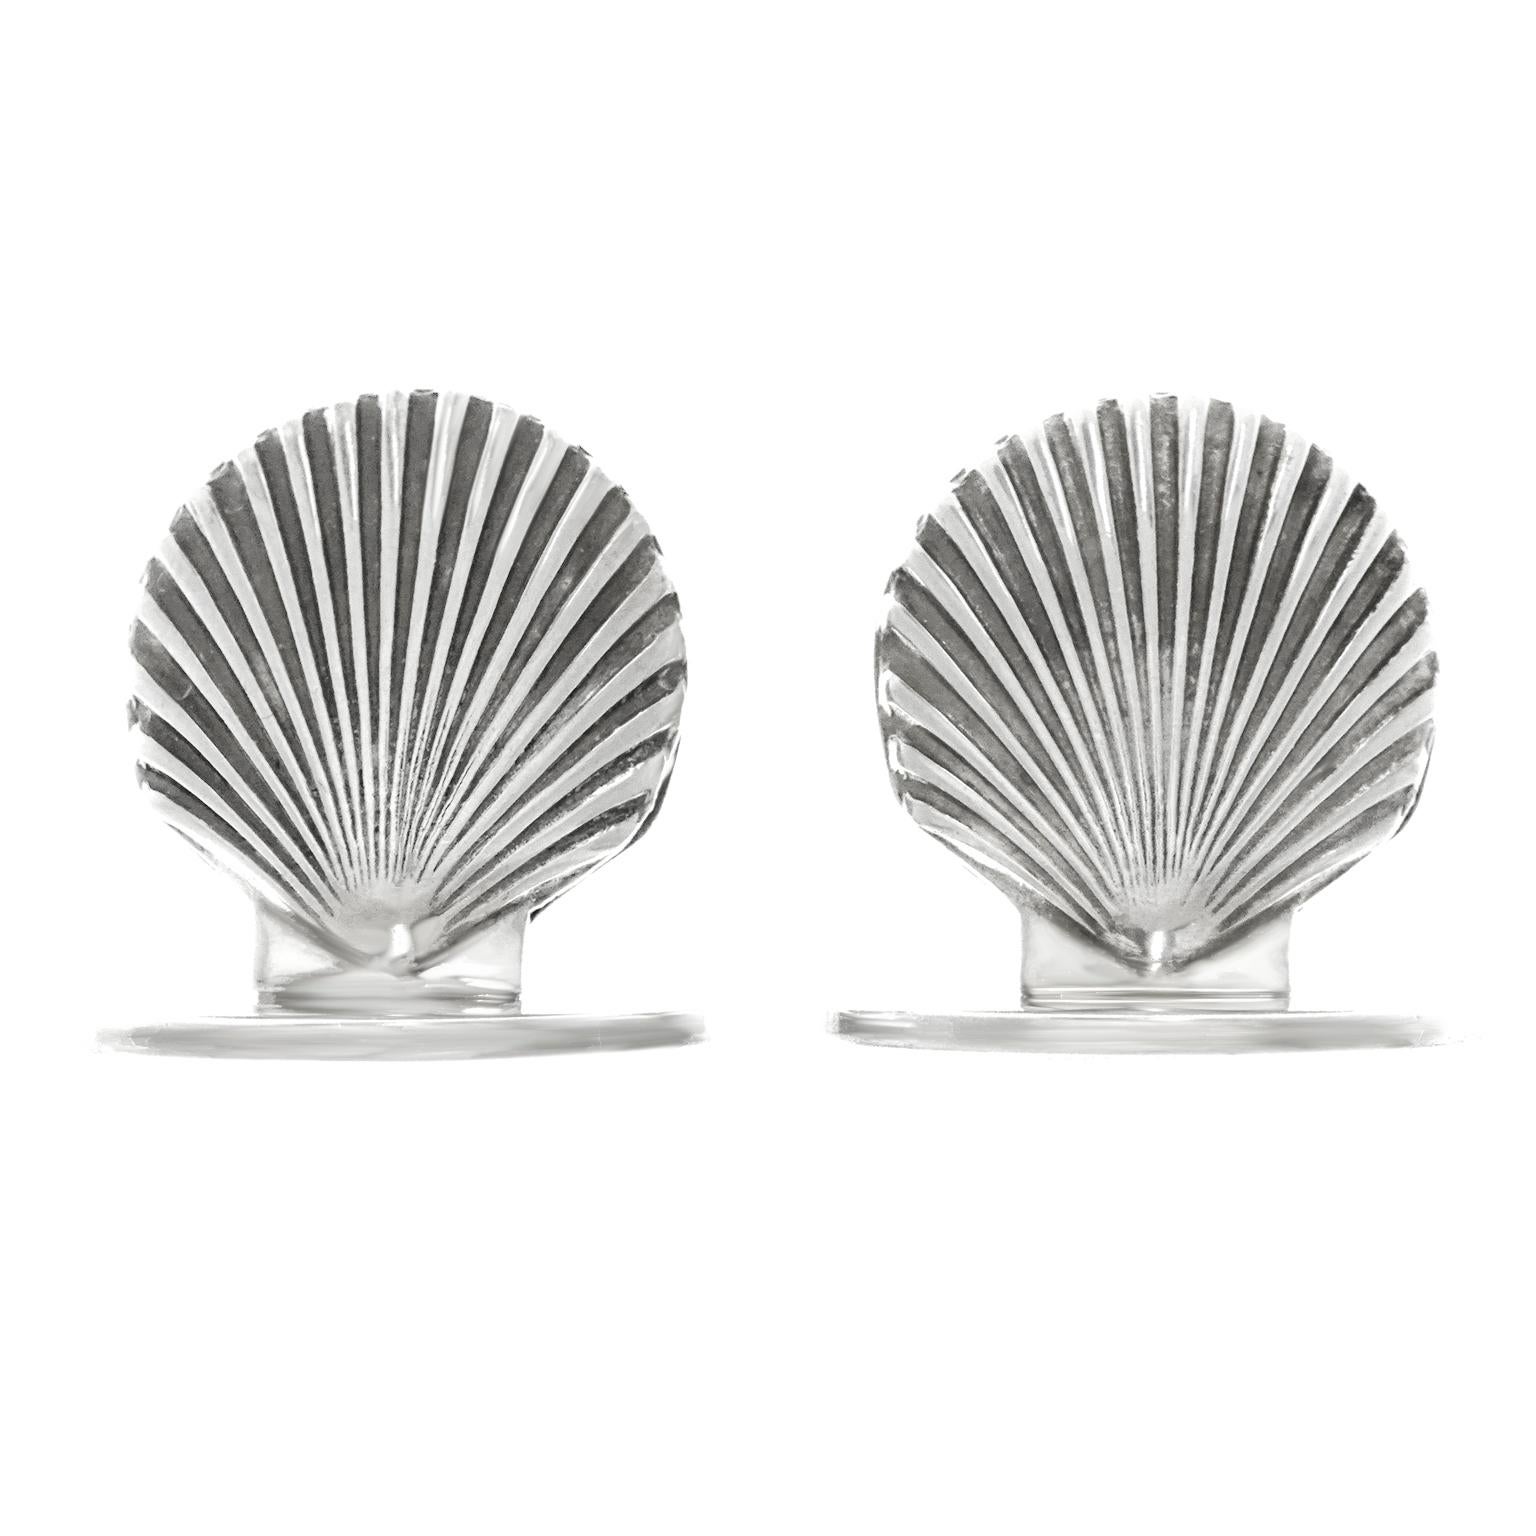 Tiffany & Co. Sterling Seashell Placecard Holders